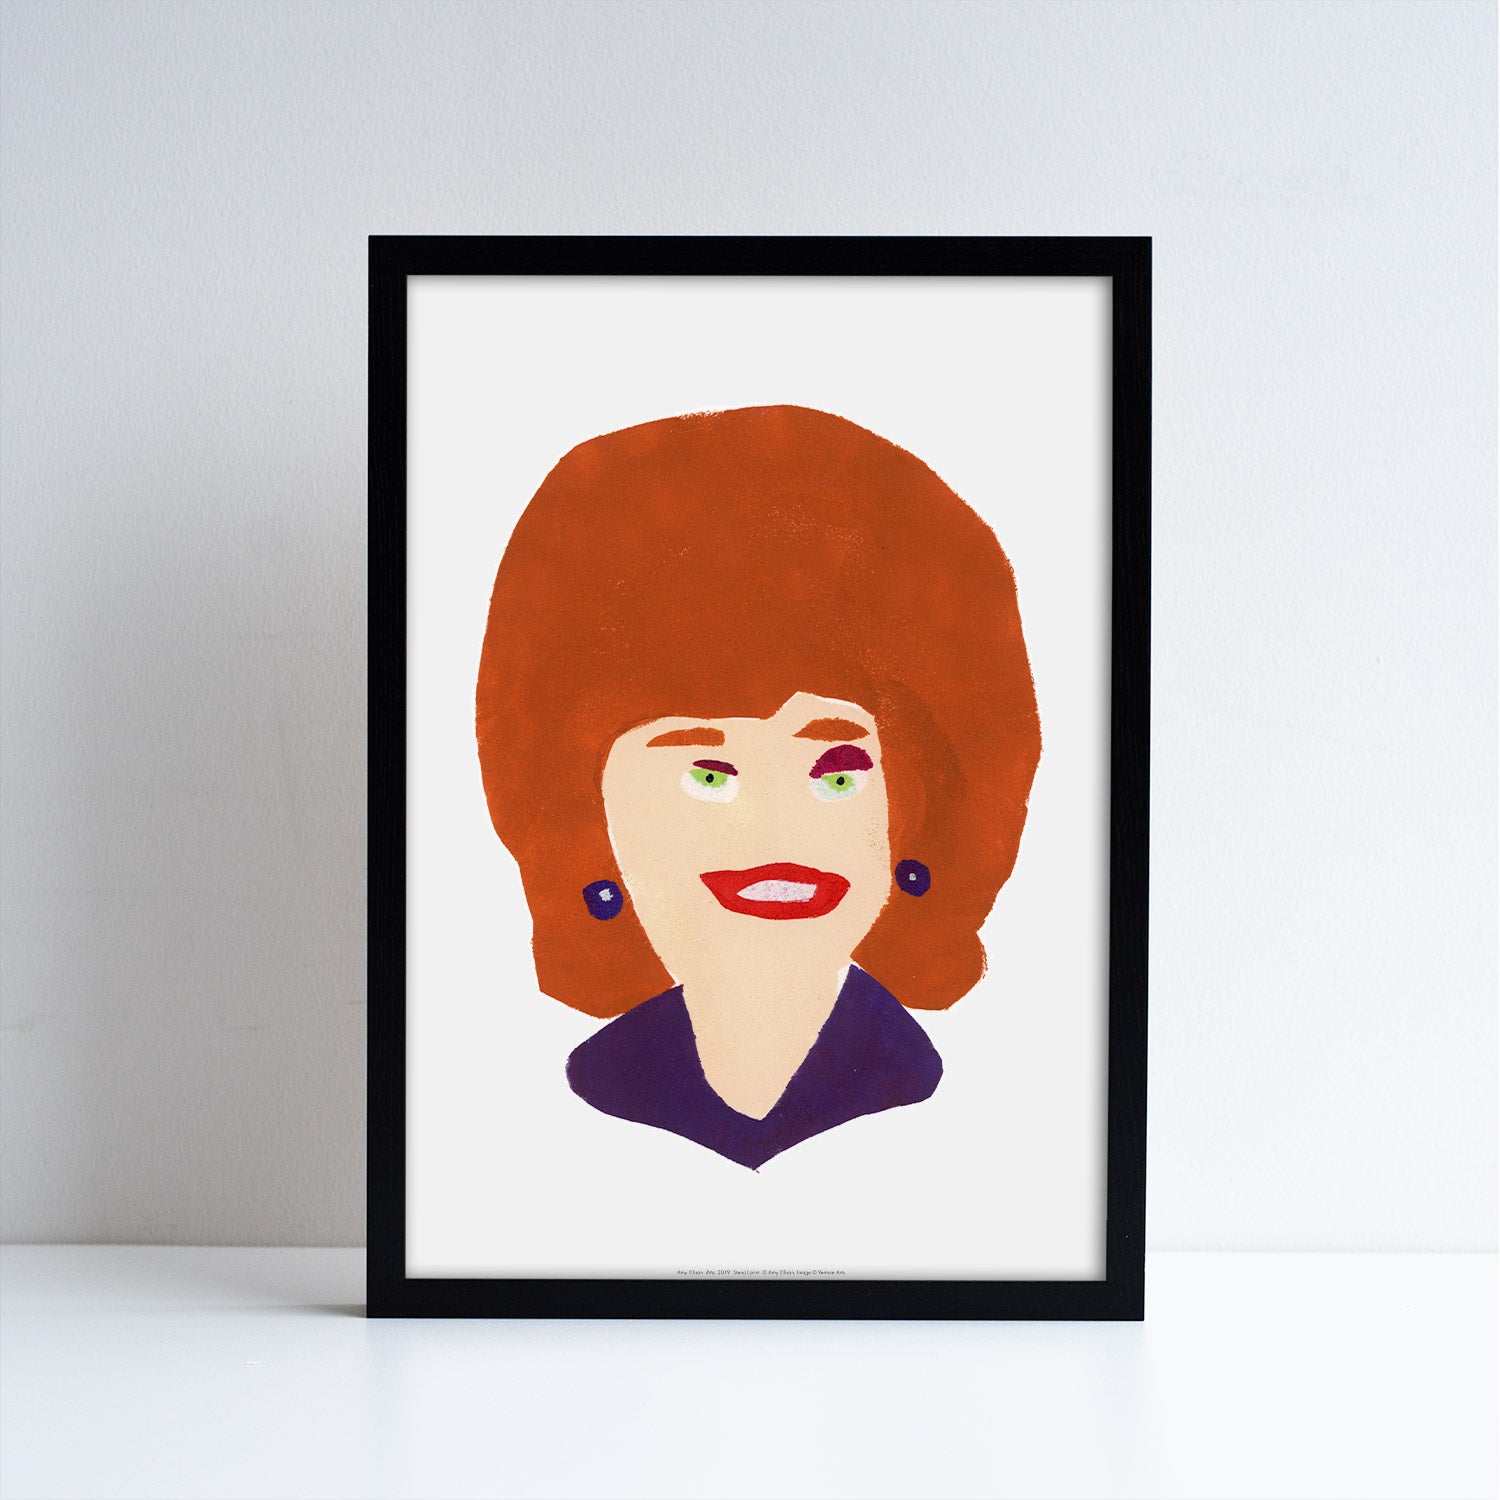 Reproduction of a digital artwork by Amy Ellison of a portrait of Rita from Coronation Street. Placed inside a black frame.